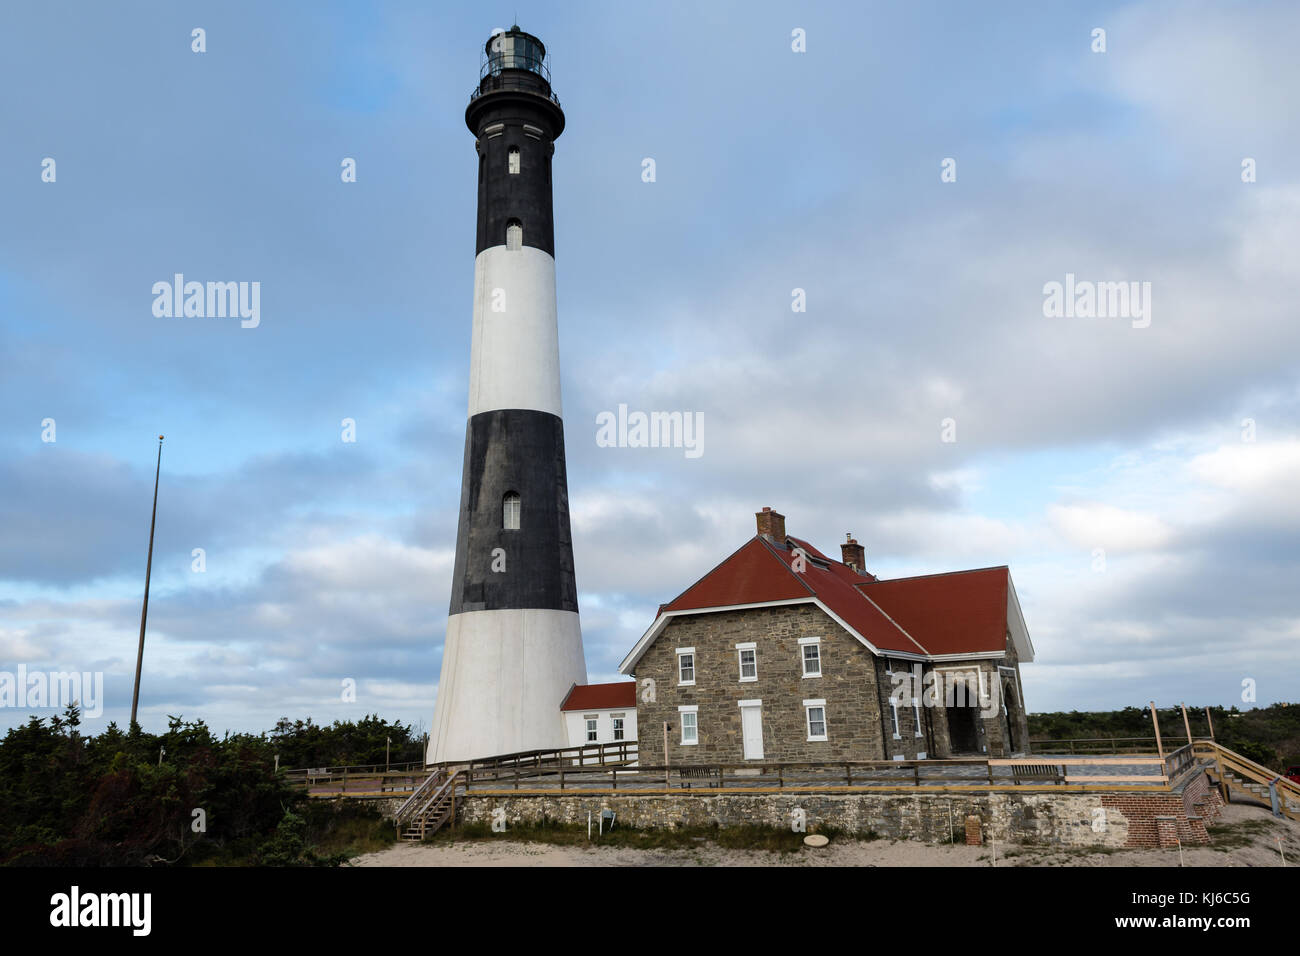 Over the lighthouse and the caretaker's house floating white clouds in the blue sky Stock Photo